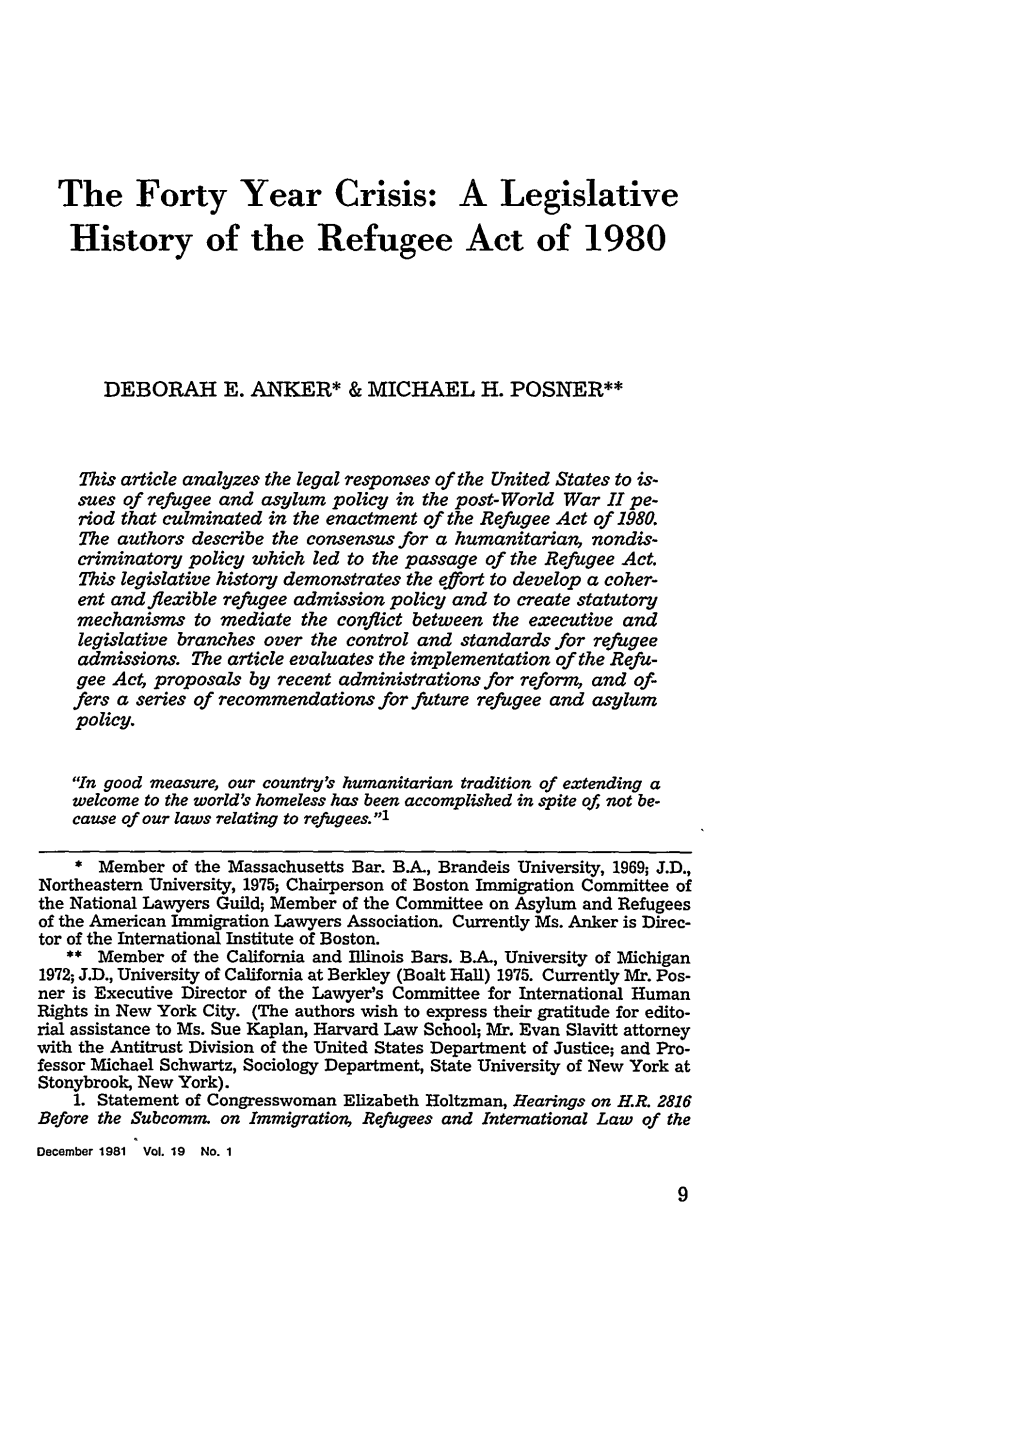 The Forty Year Crisis: a Legislative History of the Refugee Act of 1980